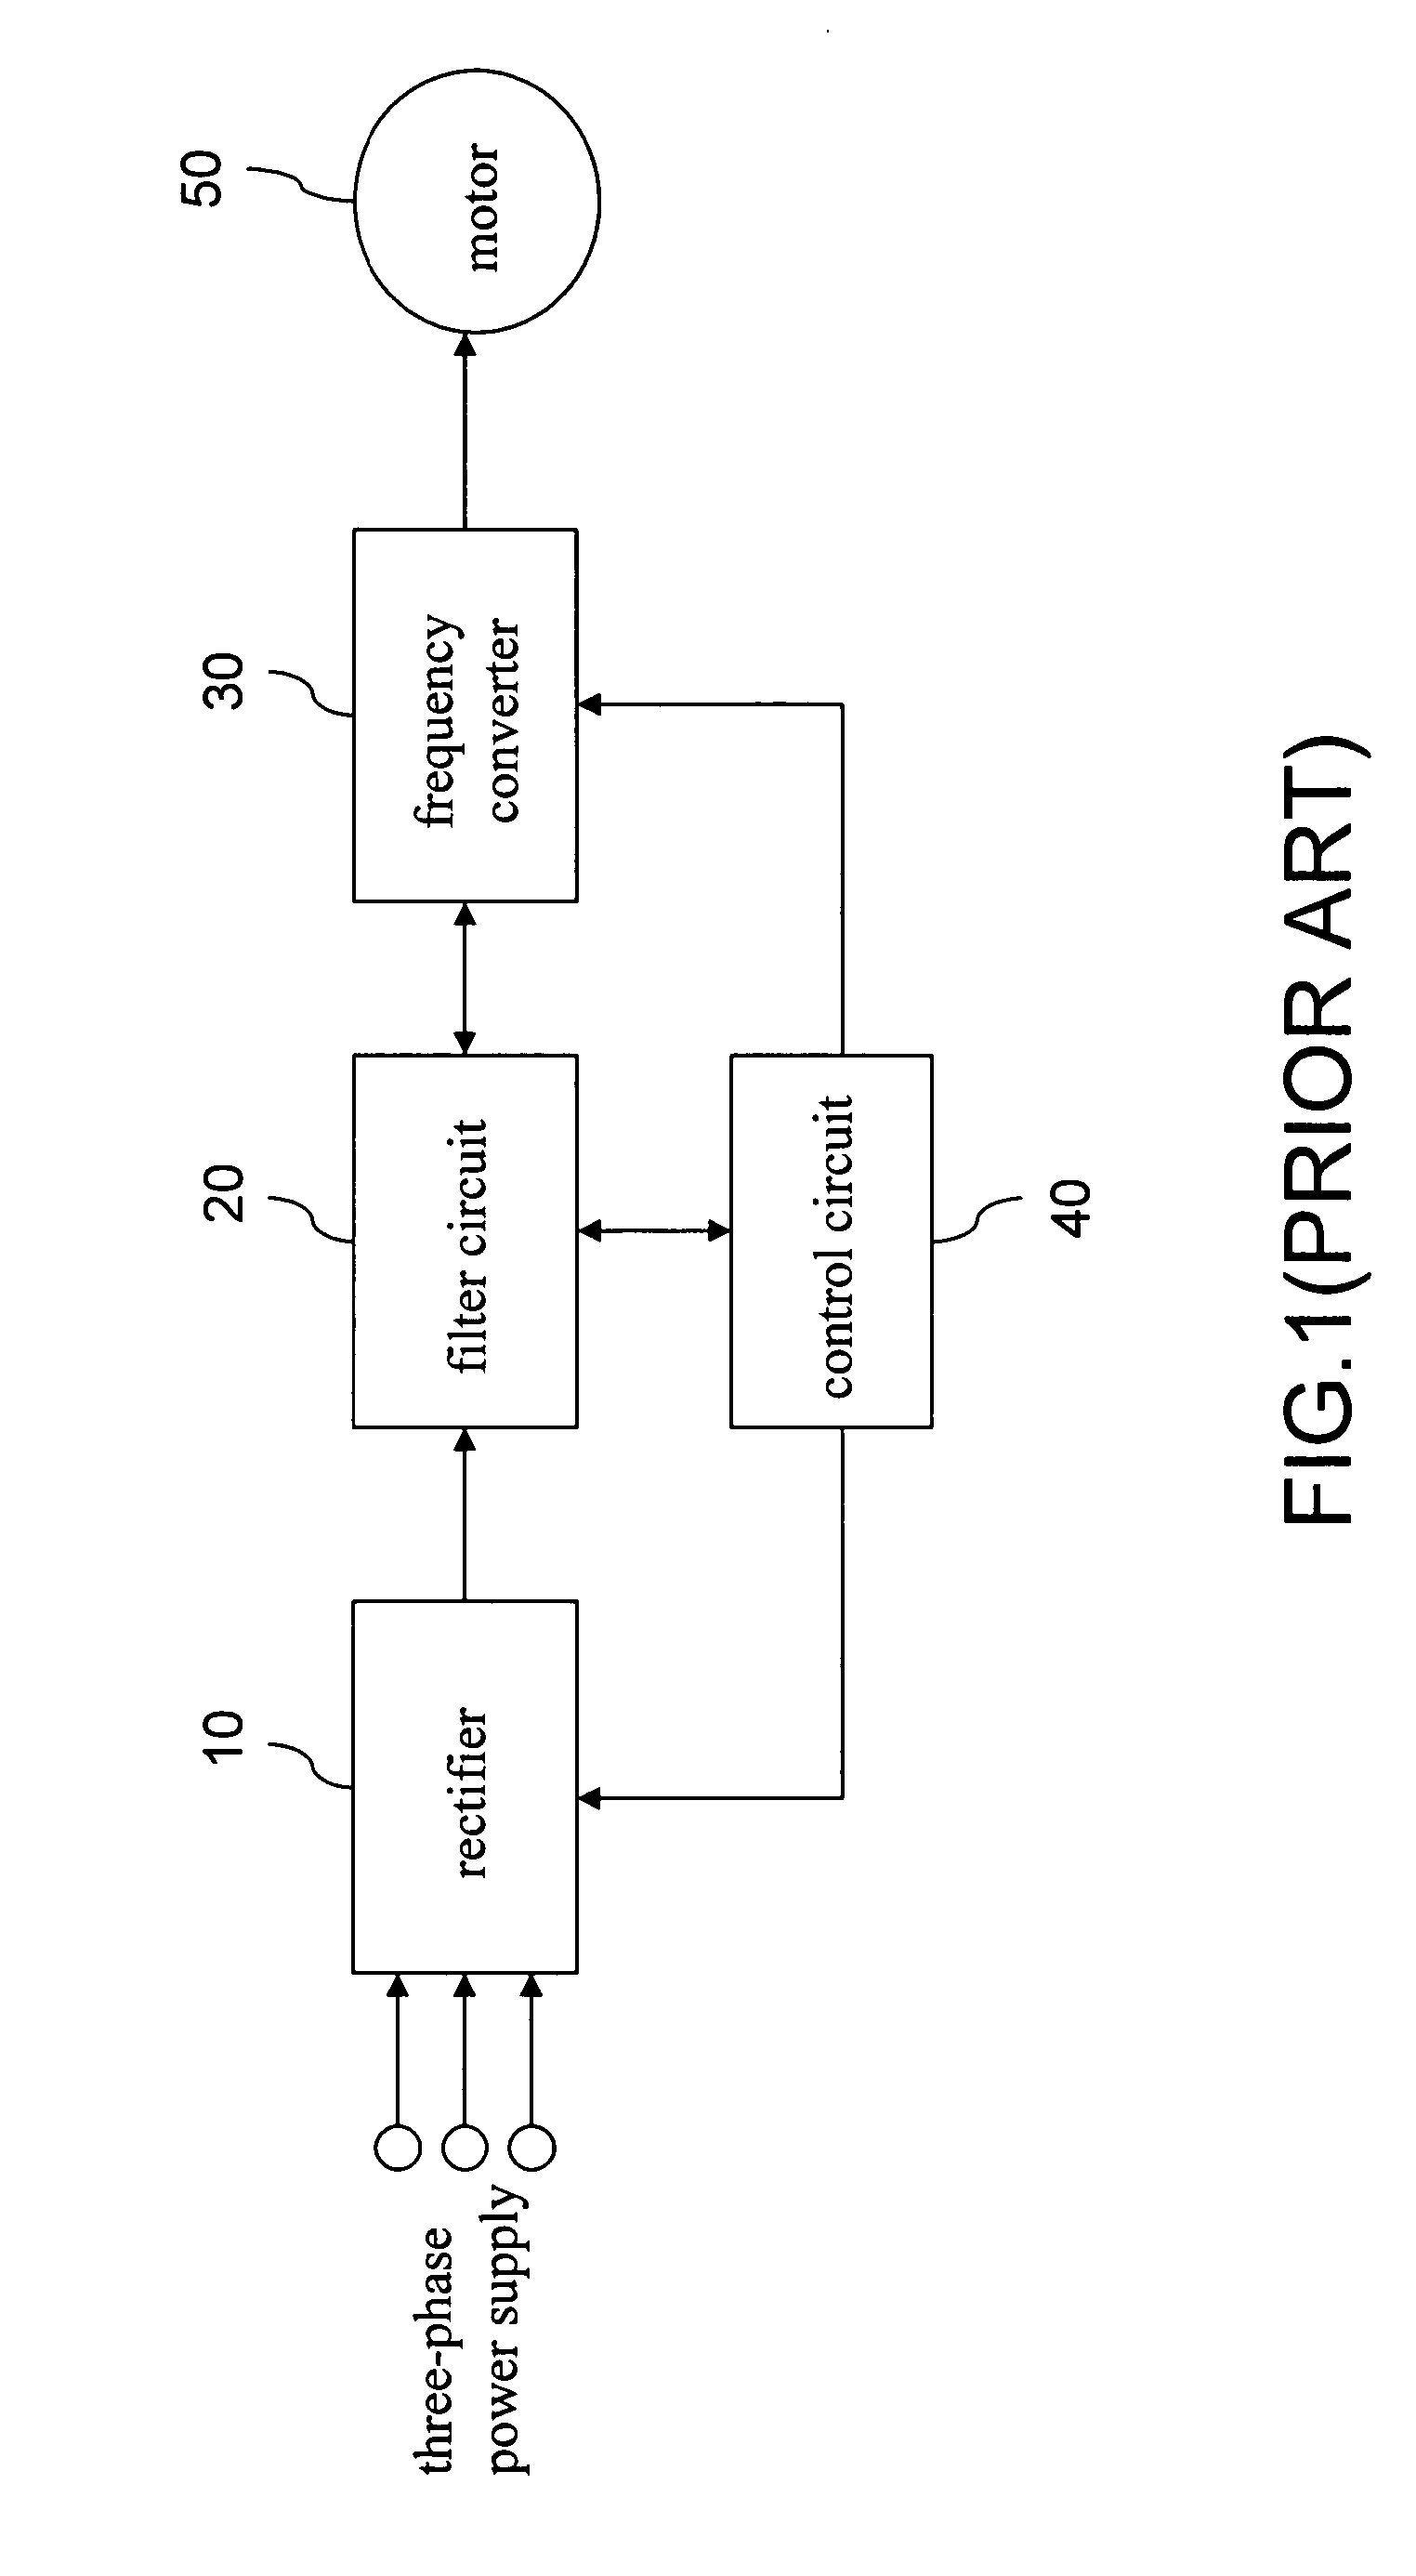 Method of detecting phase-loss state of three-phase power supply